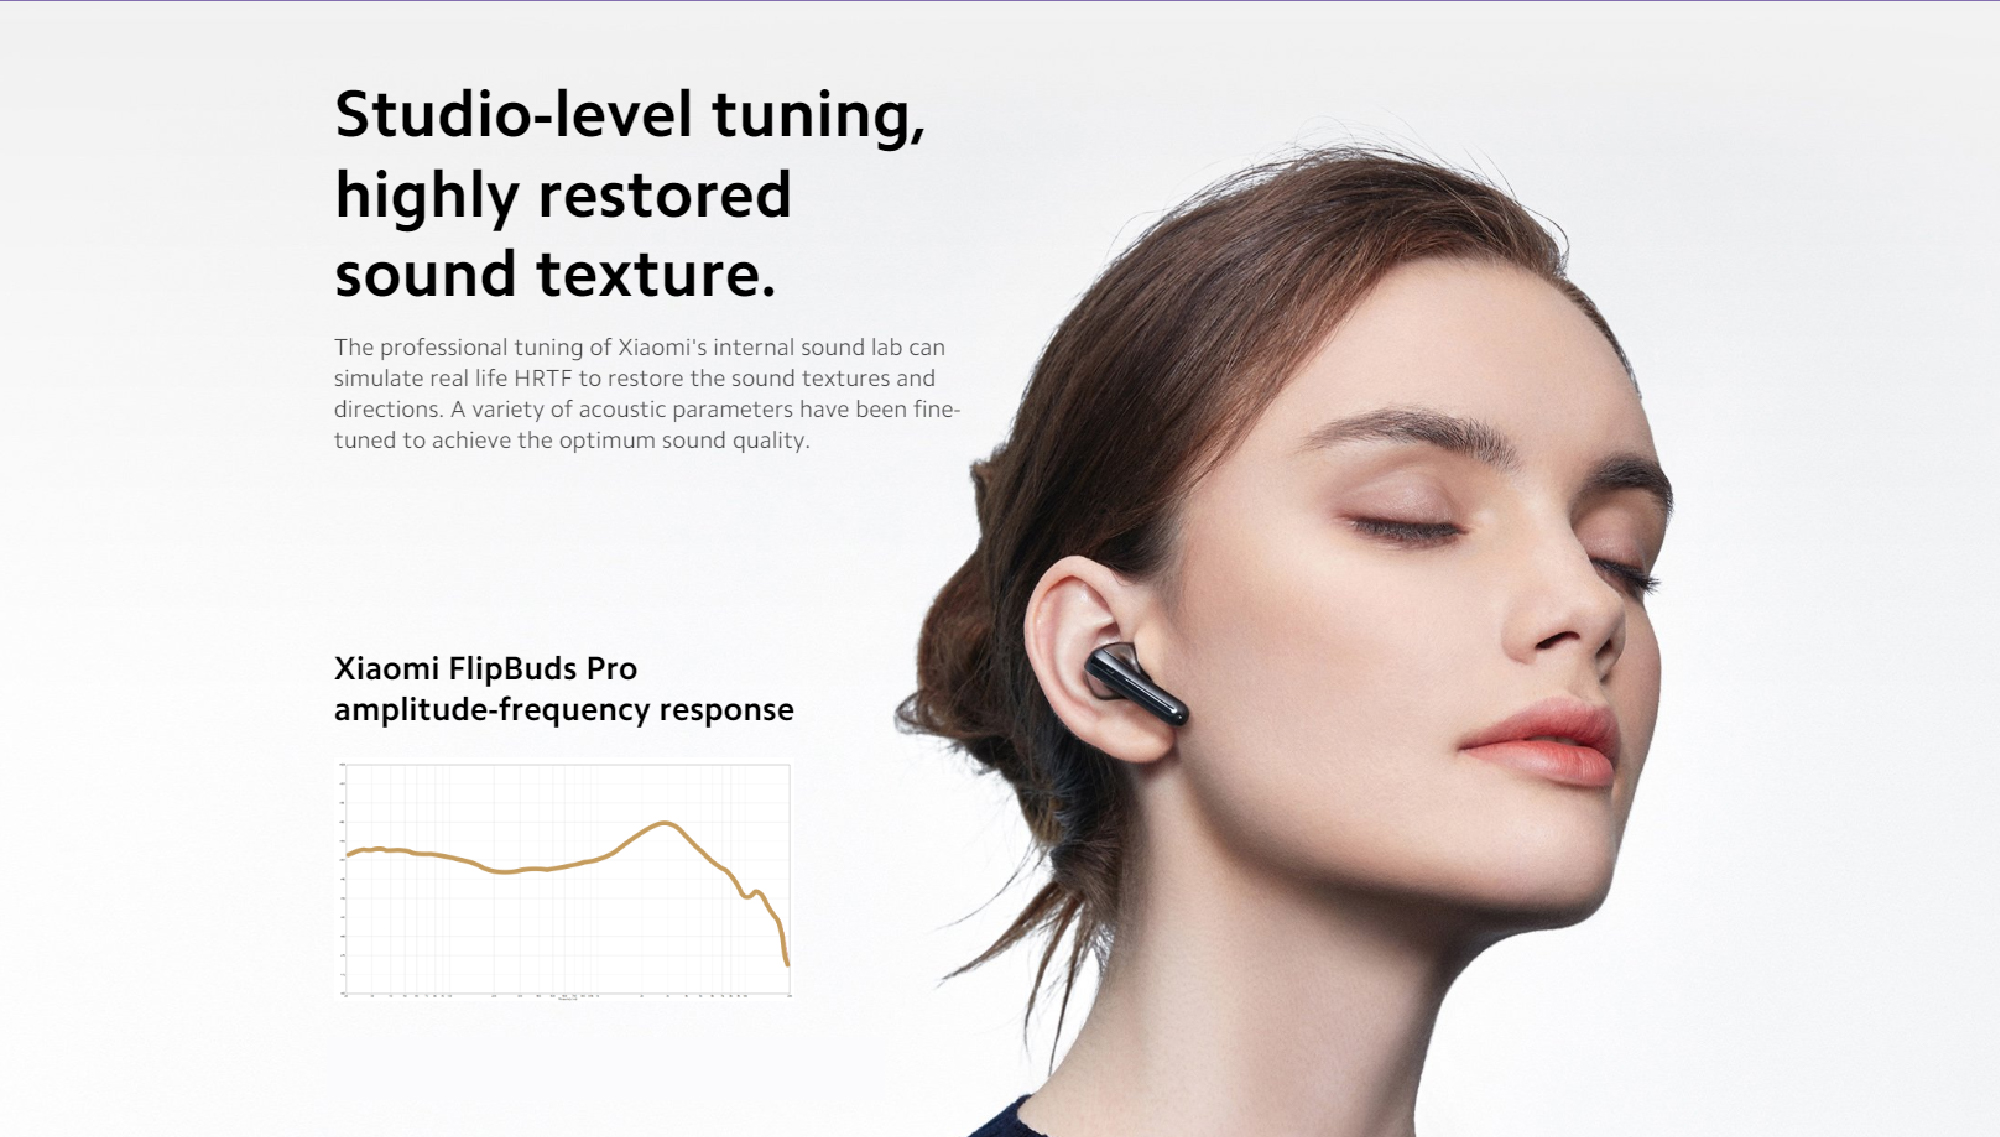 Xiaomi FlipBuds Pro: Wireless Earbuds with Hi-Res Audio Support, Dual Dynamic Drivers, 40dB ANC, 3 ANC Modes, IPX5 Rated